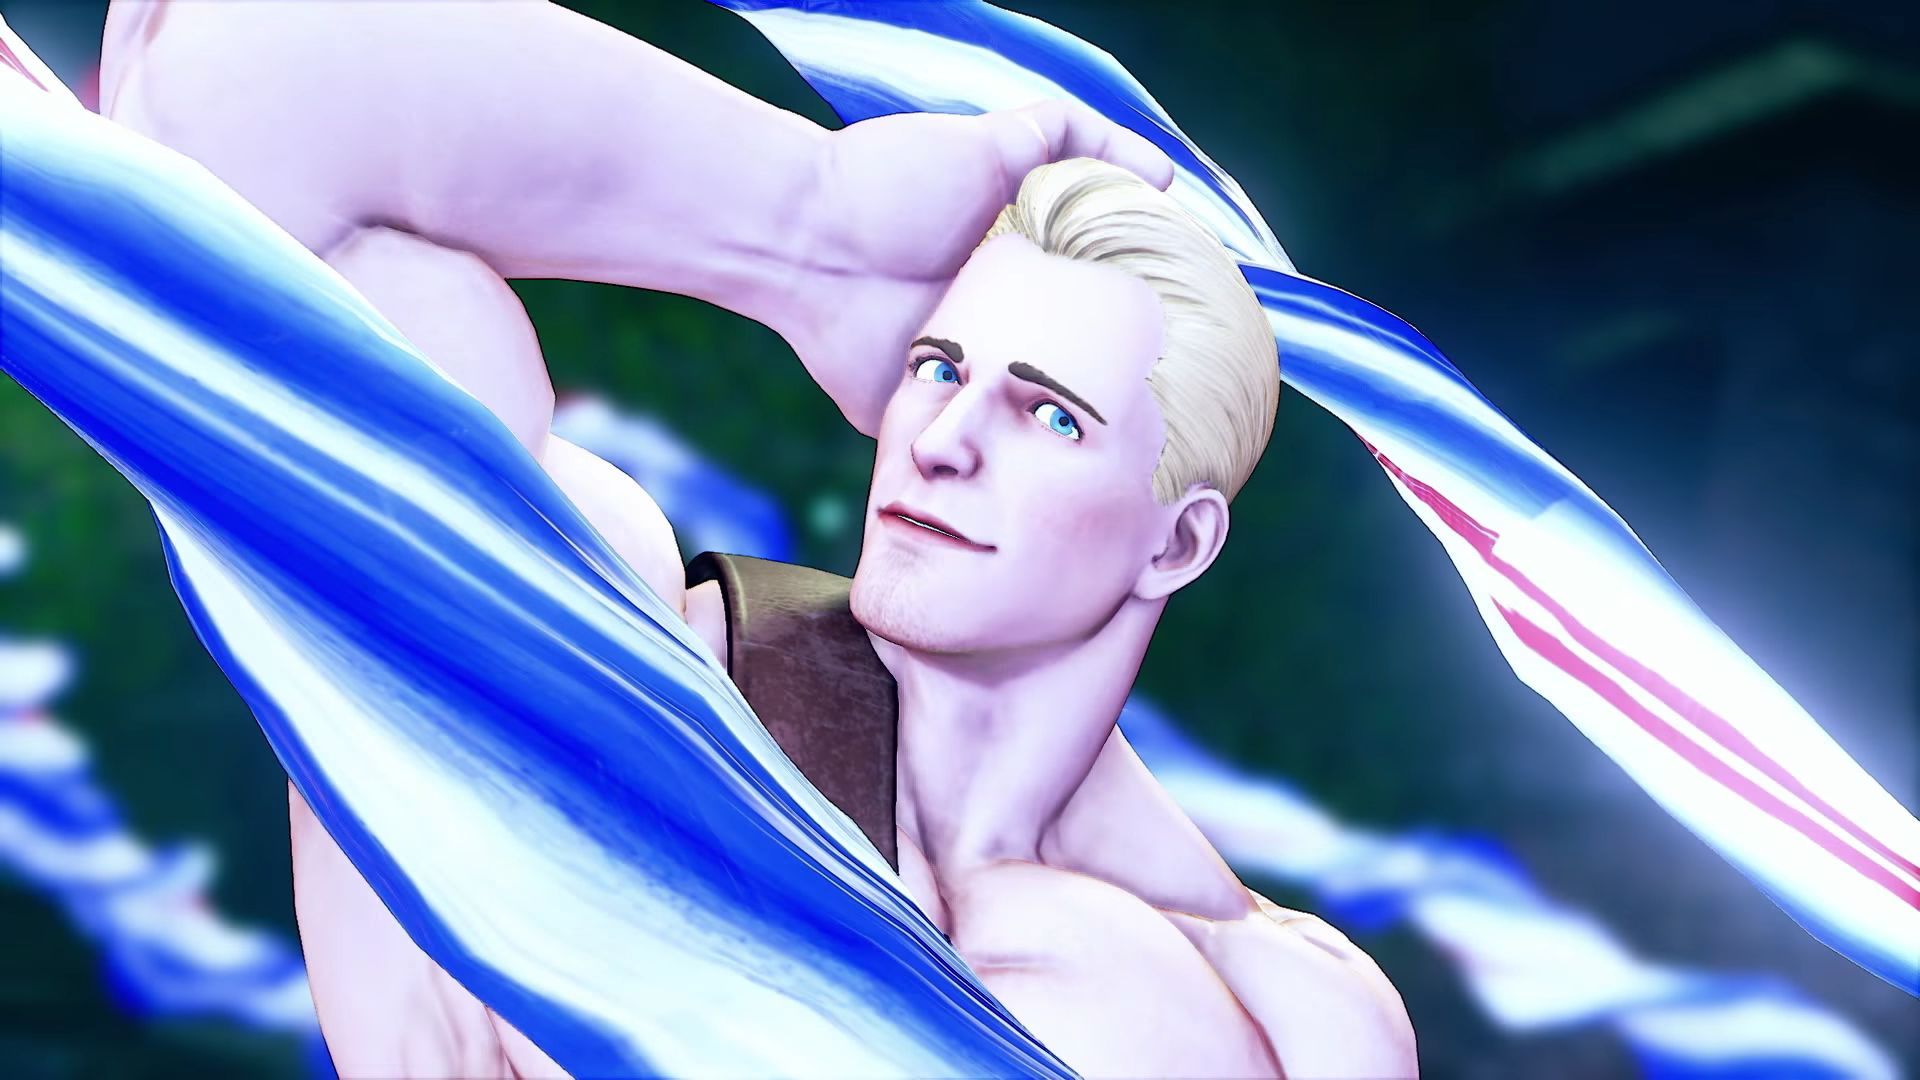 Cody Comes To Street Fighter V Arcade Edition In June, And He's Bringing Some Final Fight Nostalgia With Him